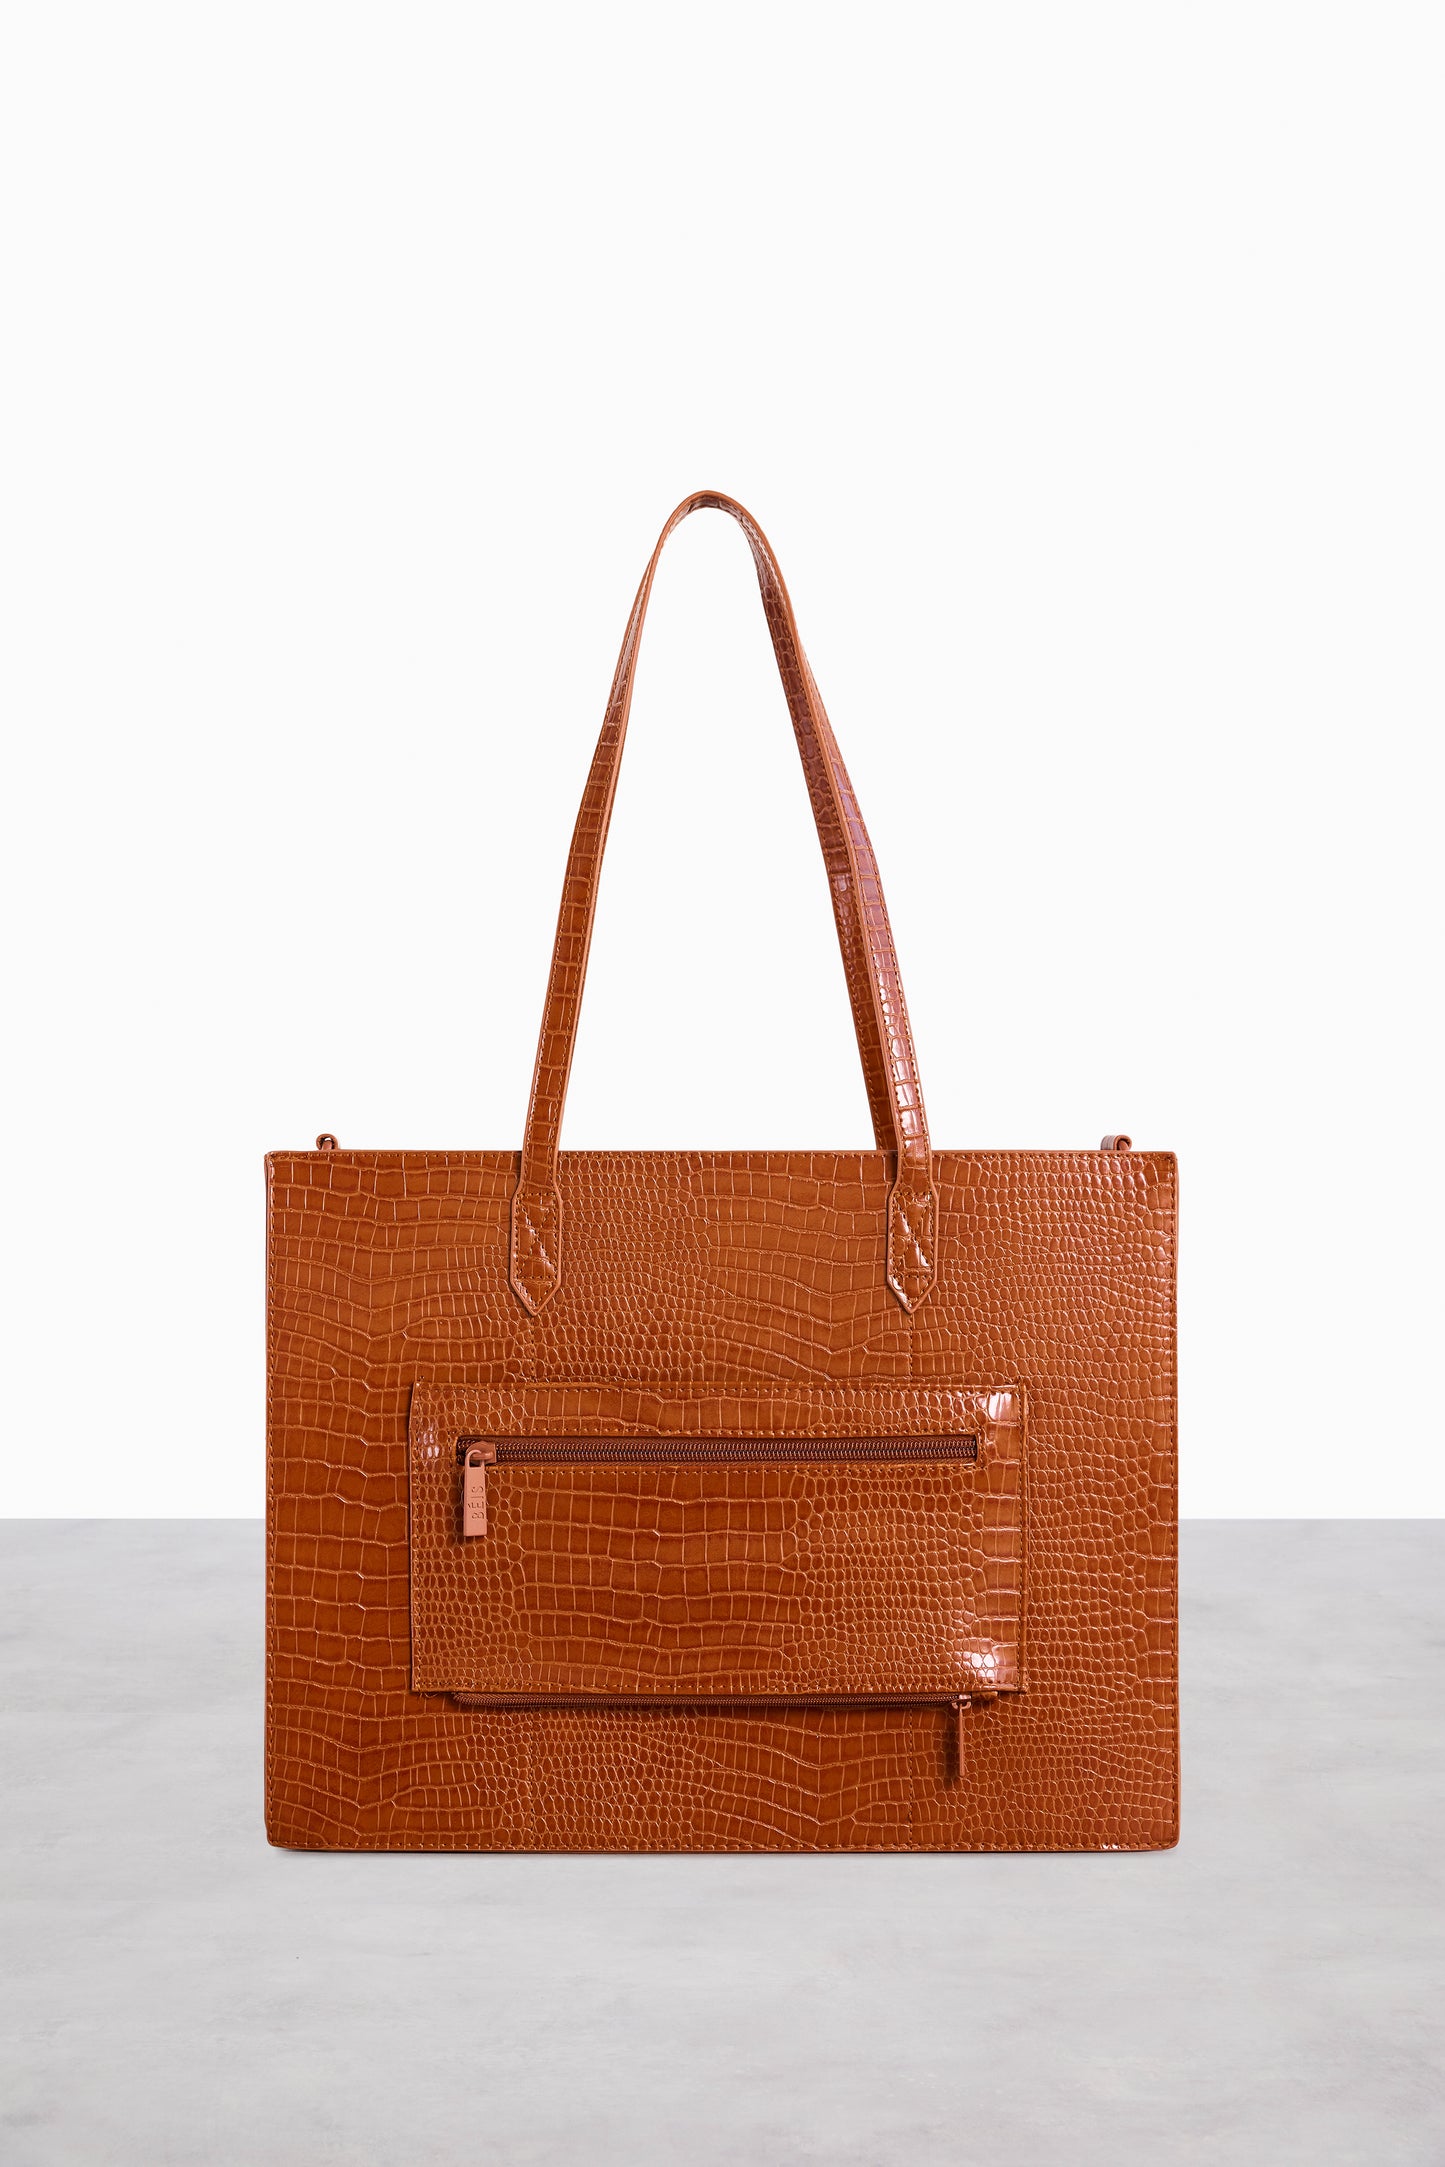 My favorite brand for vegan leather bags - Color & Chic